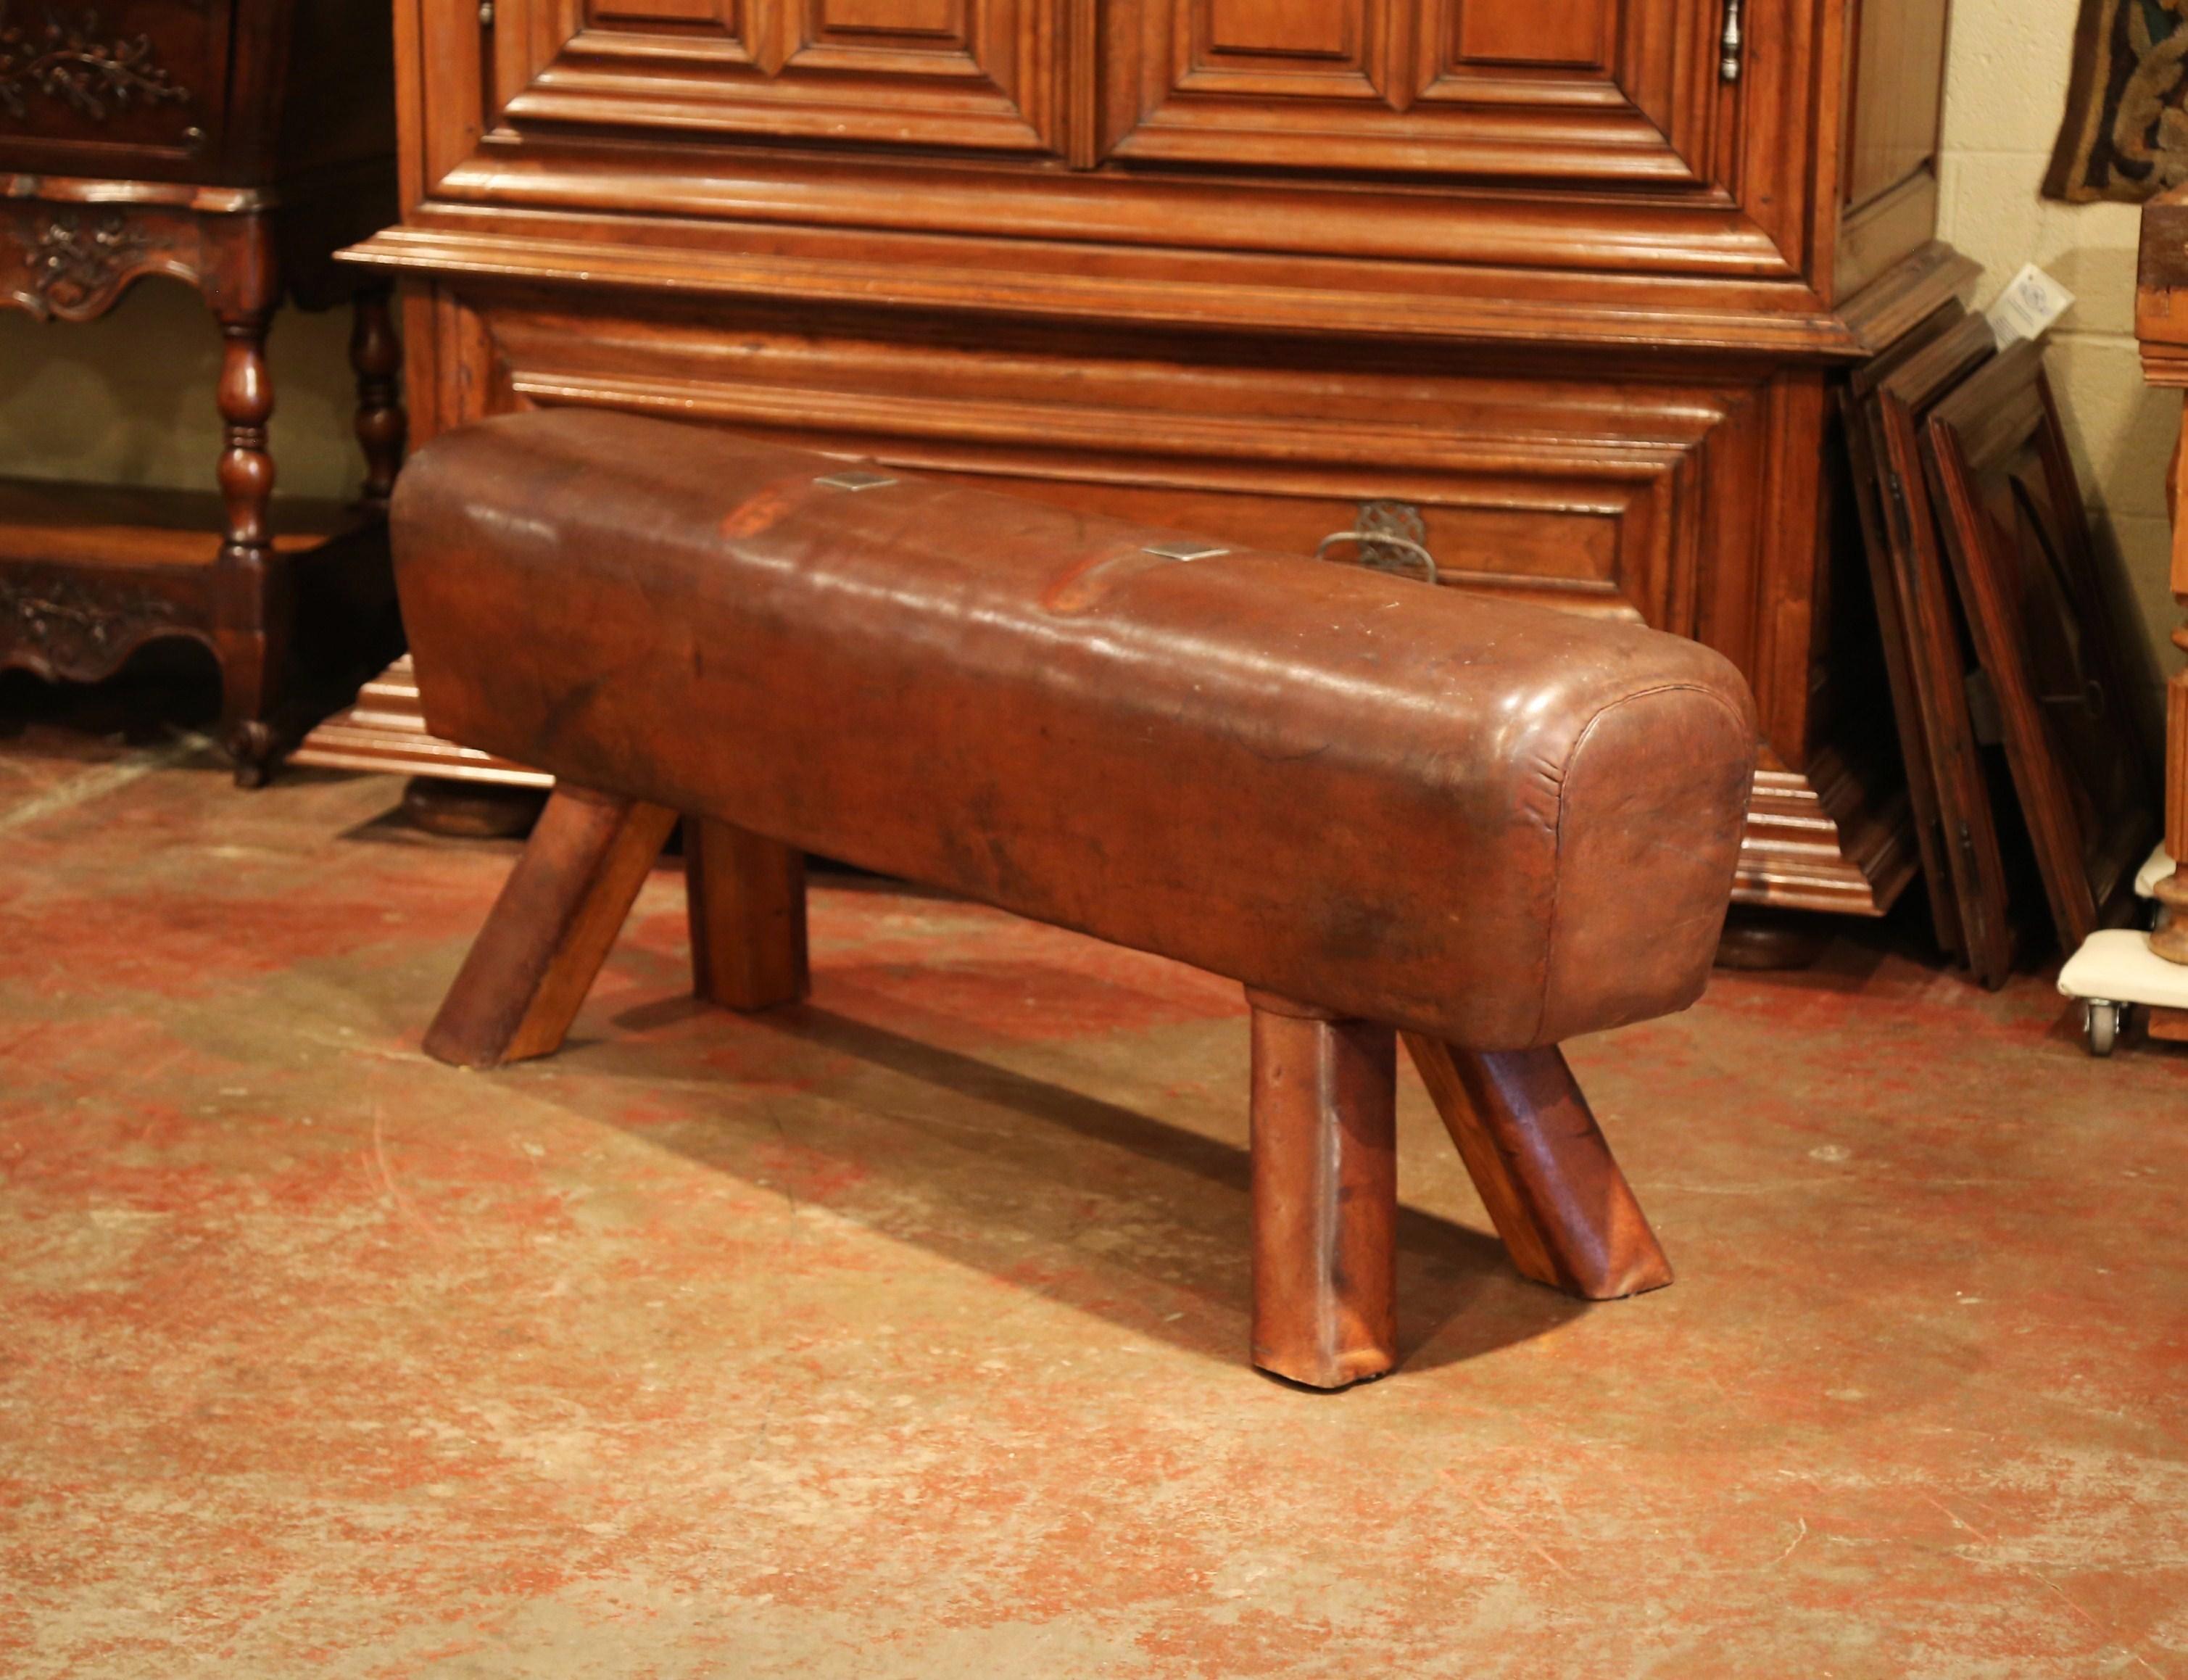 This antique, long gymnasium leather pommel horse bench was crafted in the Czech Republic, circa 1920. The rustic piece sits on four wooden legs covered with original leather; the long seat is upholstered with the original patinated brown leather